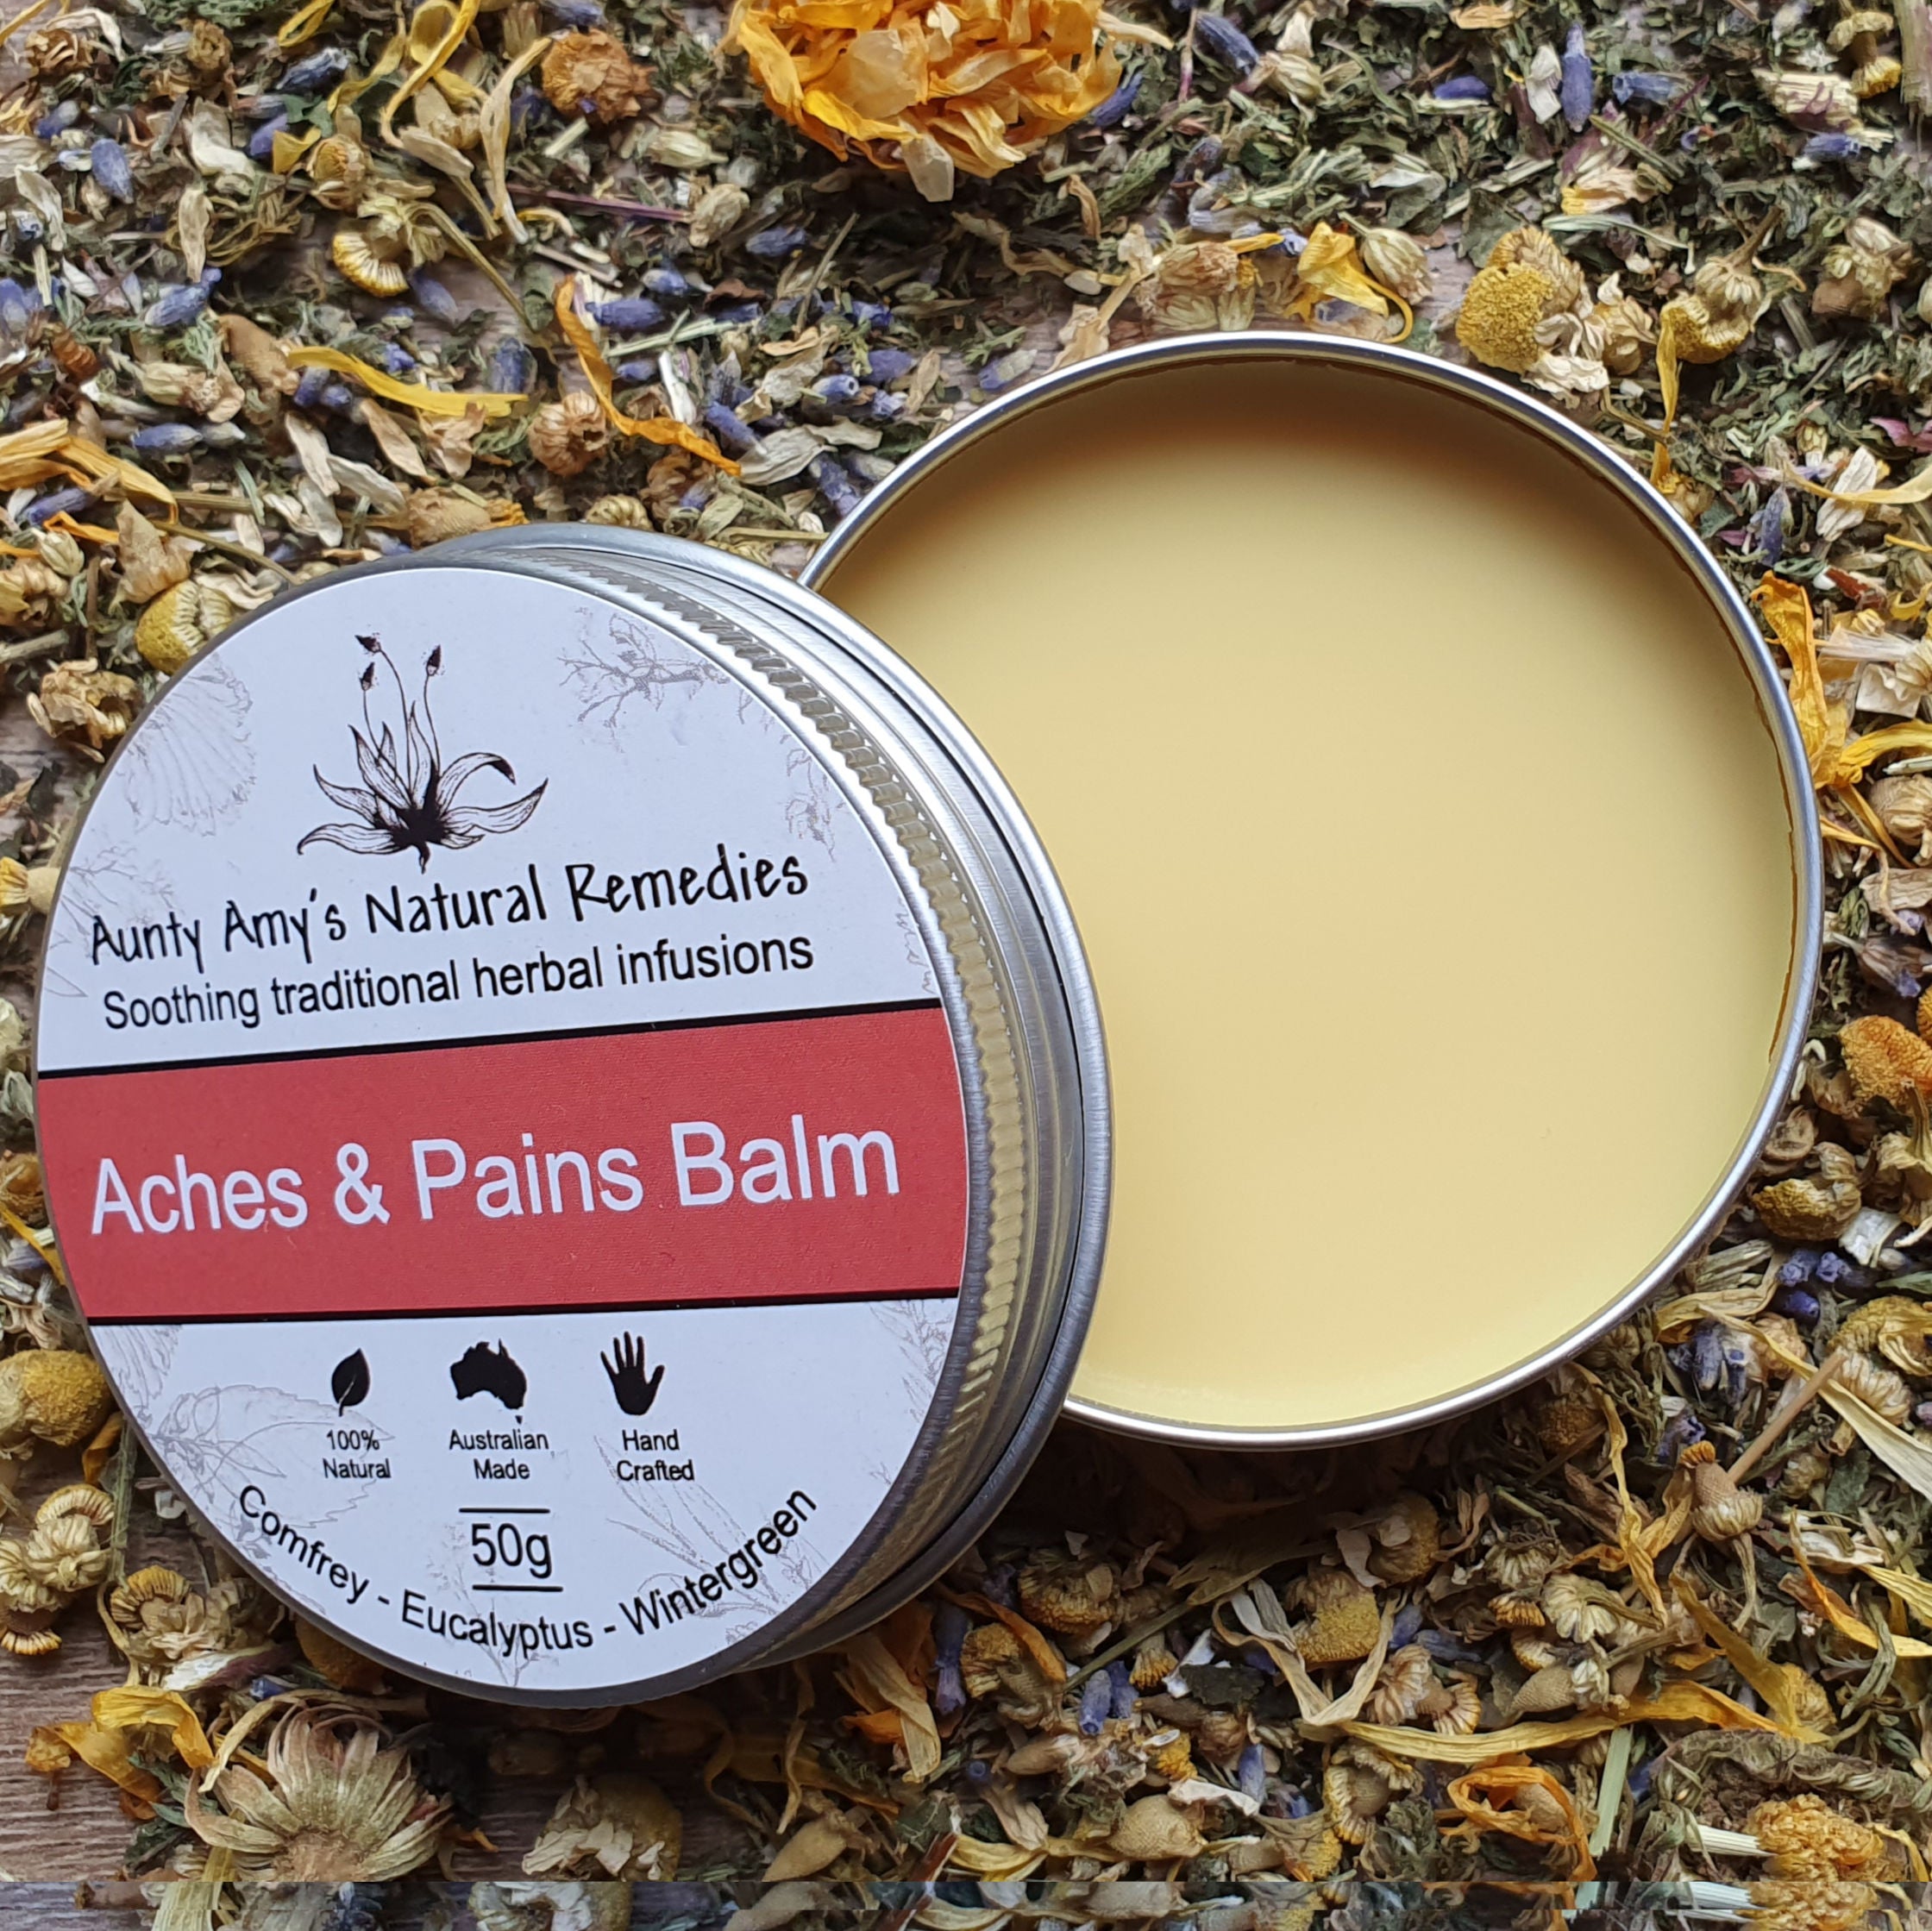 Aunty Amys - Natural Remedies Aches & Pains Balm